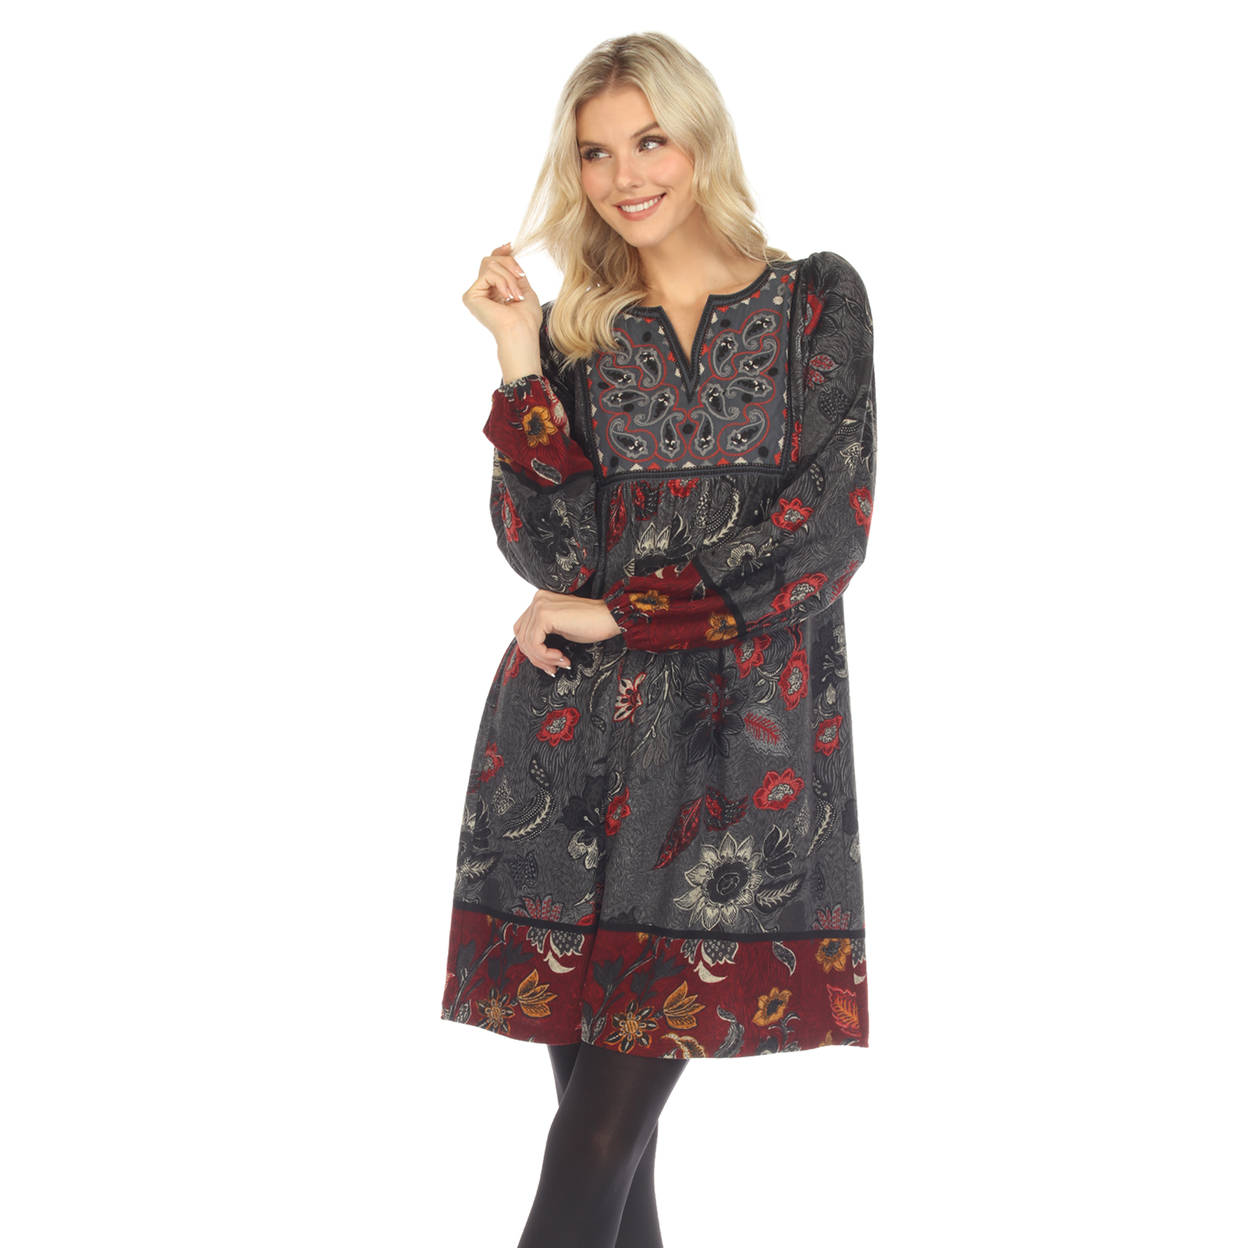 White Mark Women's Floral Paisley Sweater Dress - Grey/red, Large